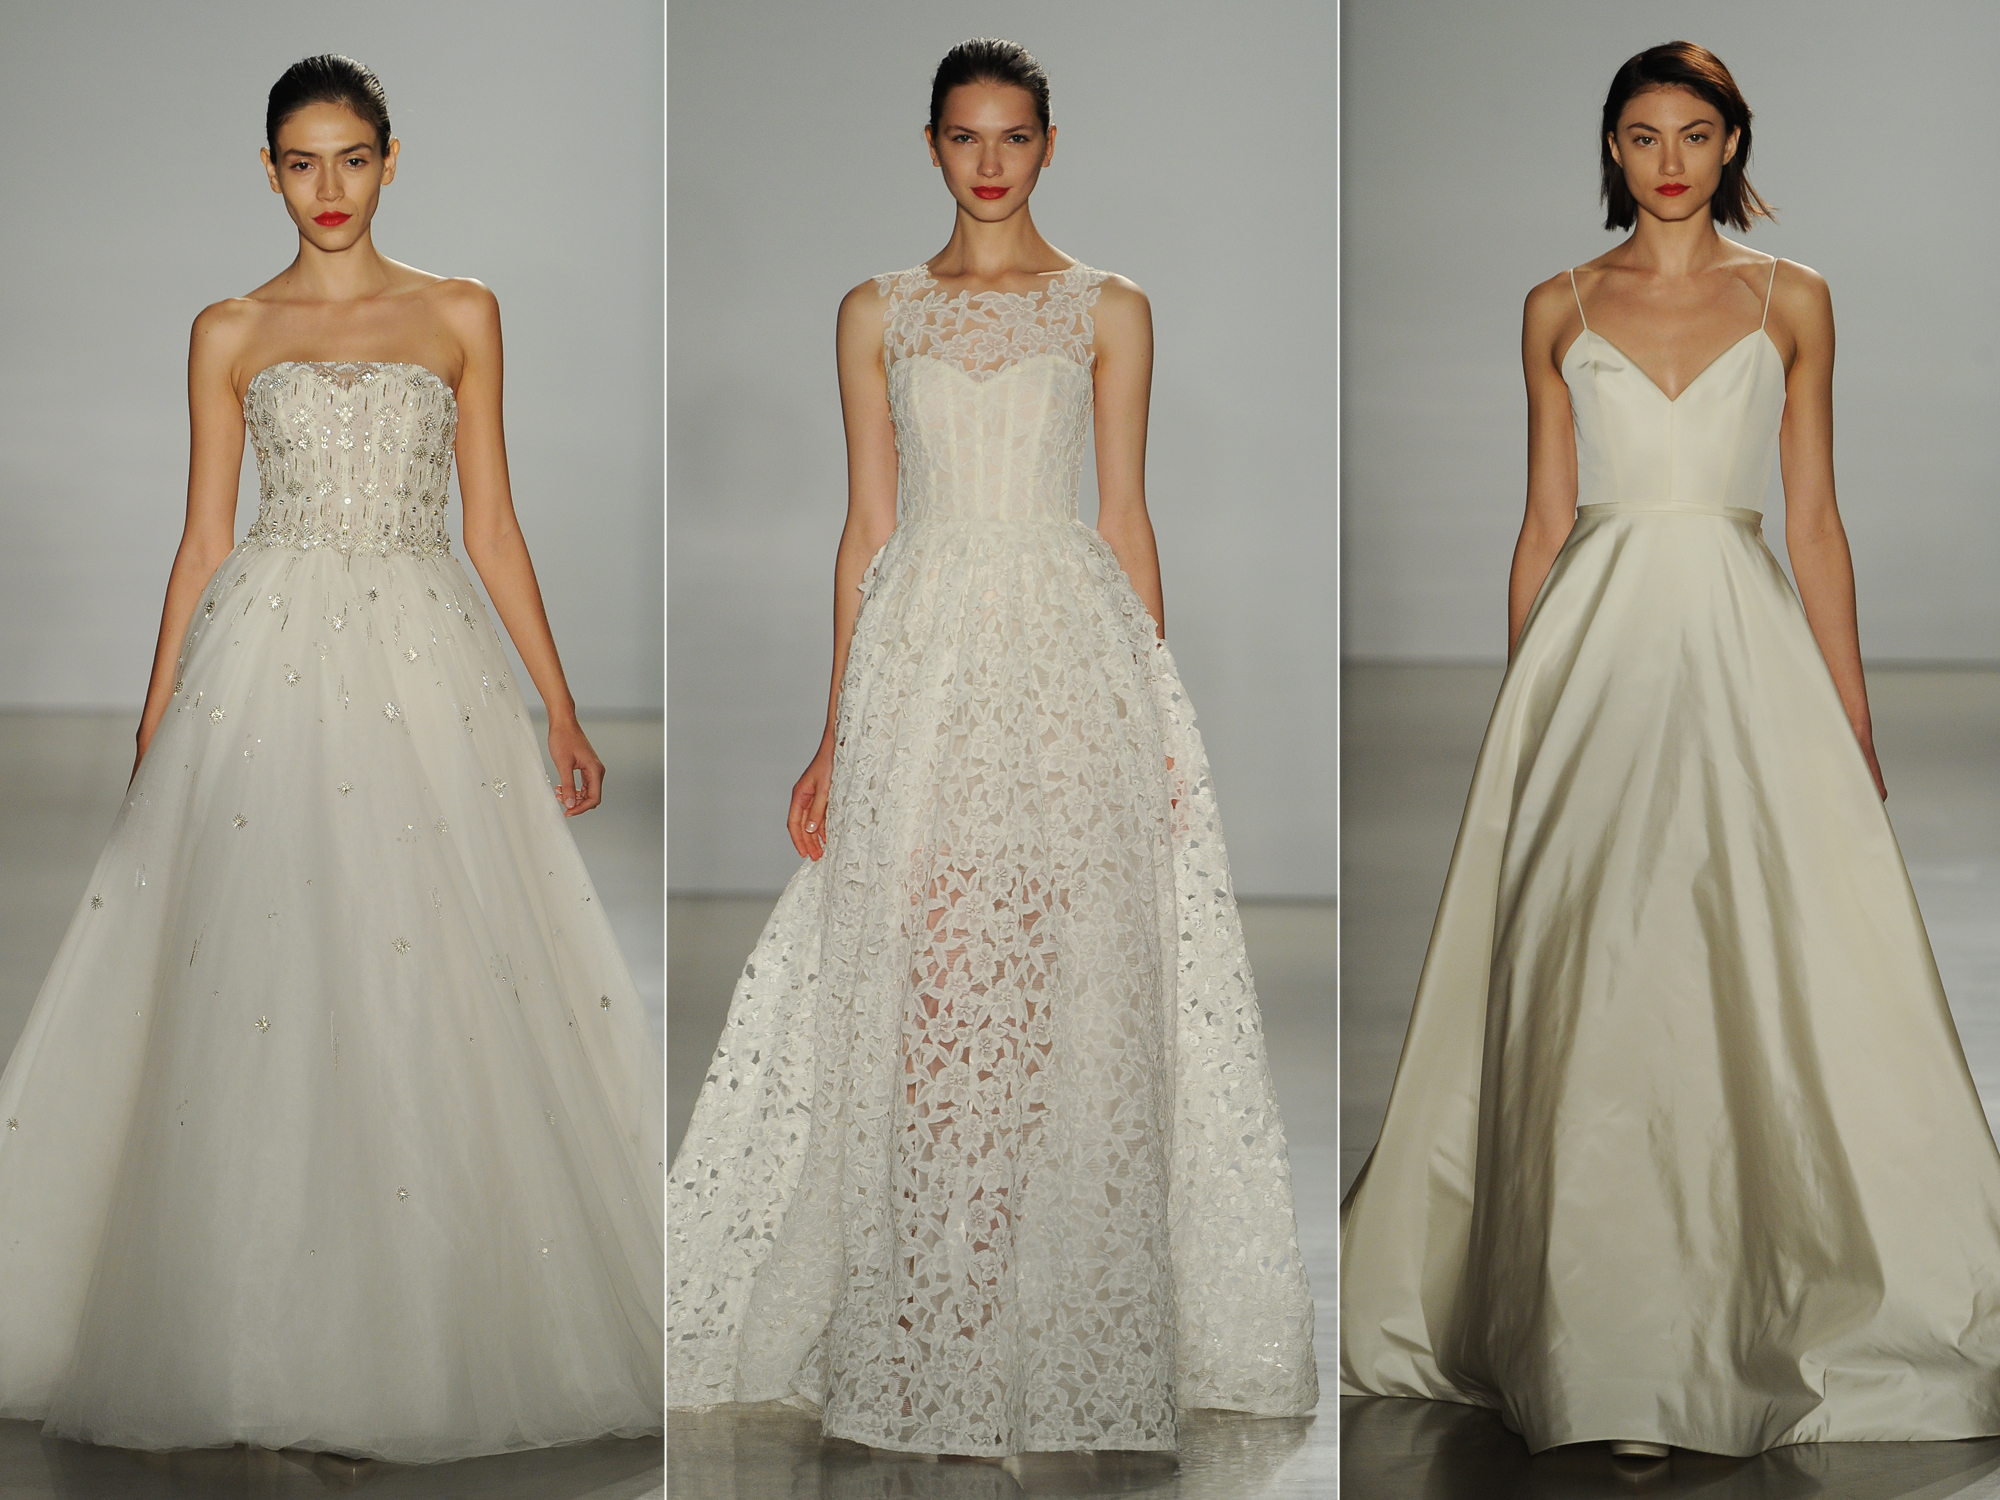 New Amsale Wedding Dresses For Fall 2016 Are Modern And Romantic ...